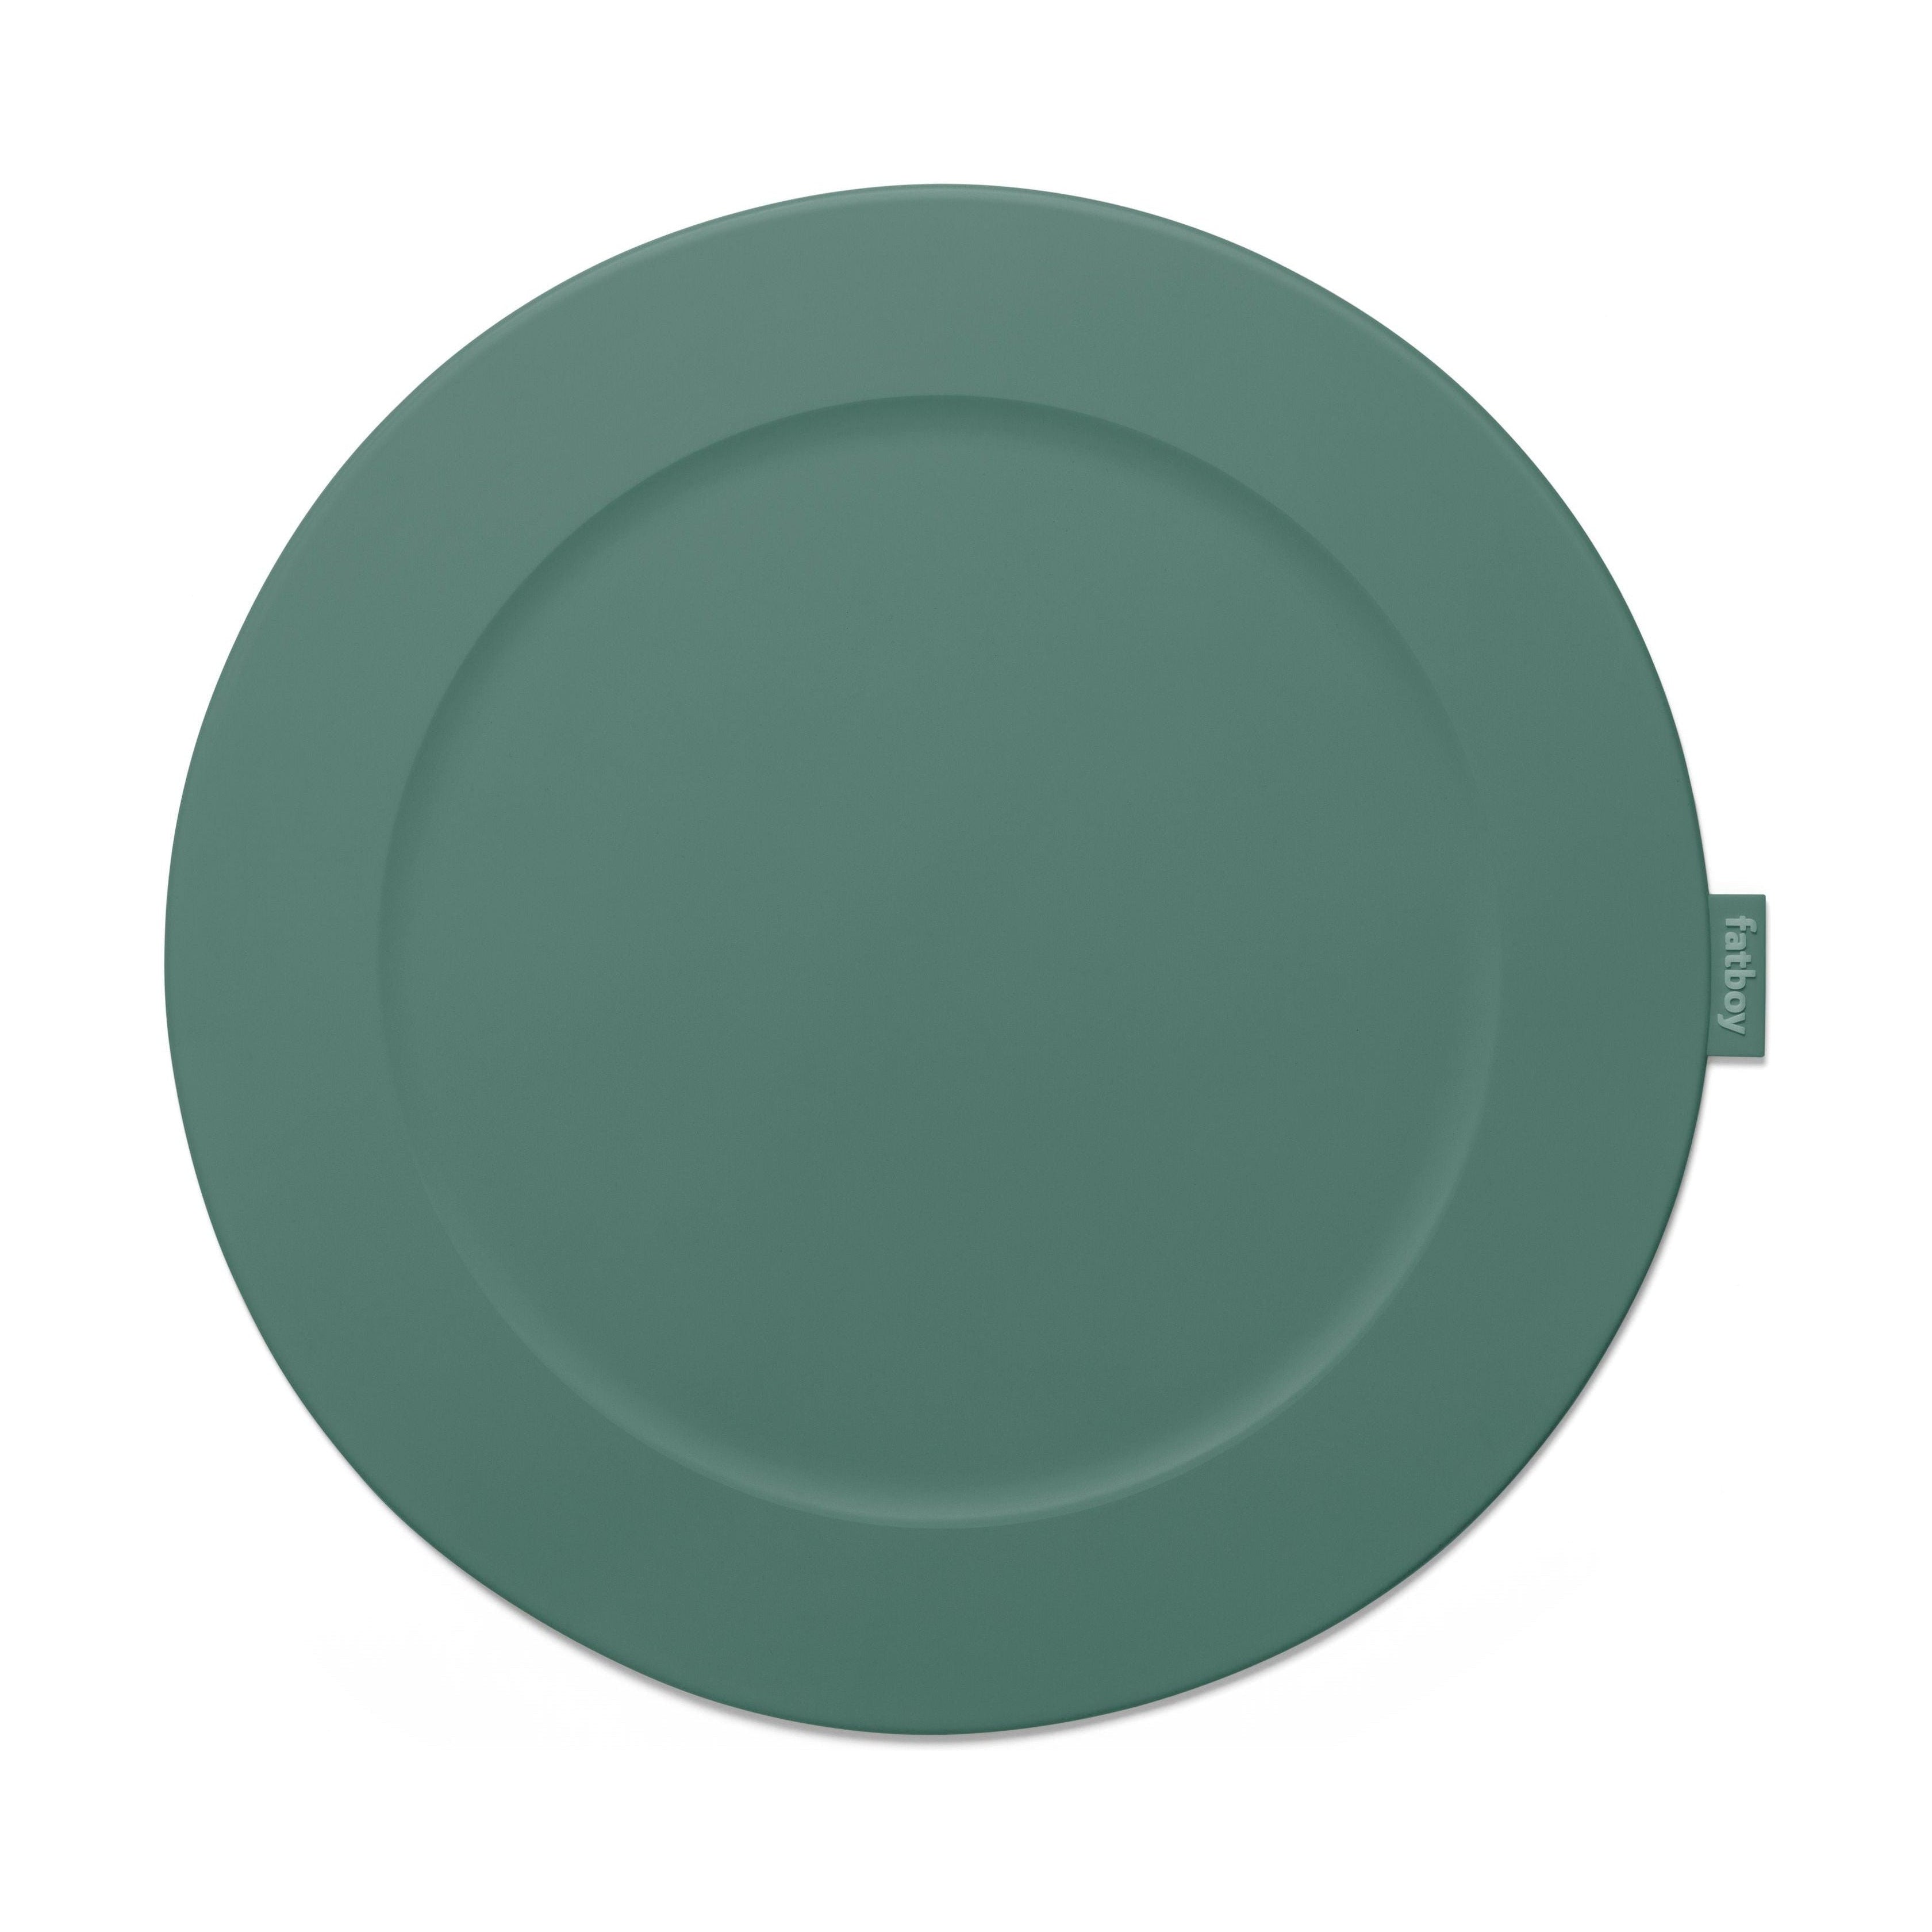 Fatboy Place Vi träffade Placemat Pine Green, 2 st.